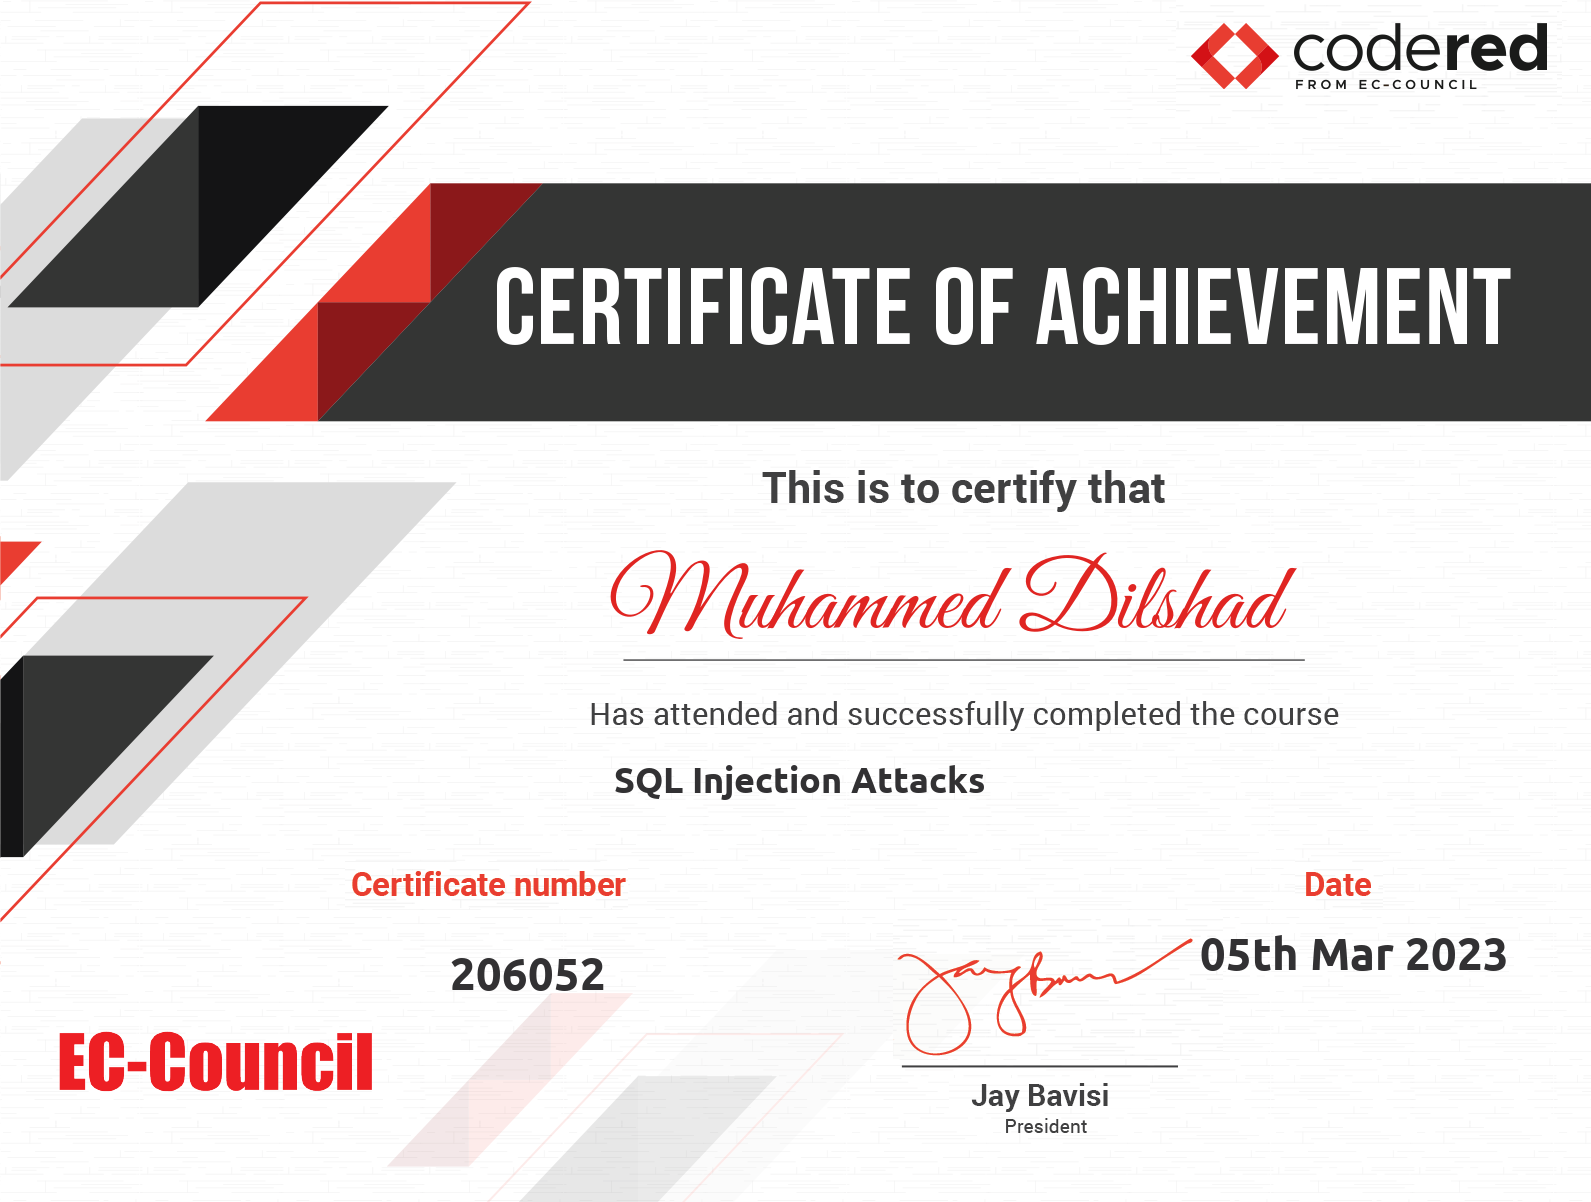 couNciL

&gt; CERTIFICATE OF ACHIEVEMENT

This is to certify that

# O)Nlitemmed Dilstad

Has attended and successfully completed the course
SQL Injection Attacks
Certificate number Date

206052 SE Mar 2023

Jay Bavisi

President